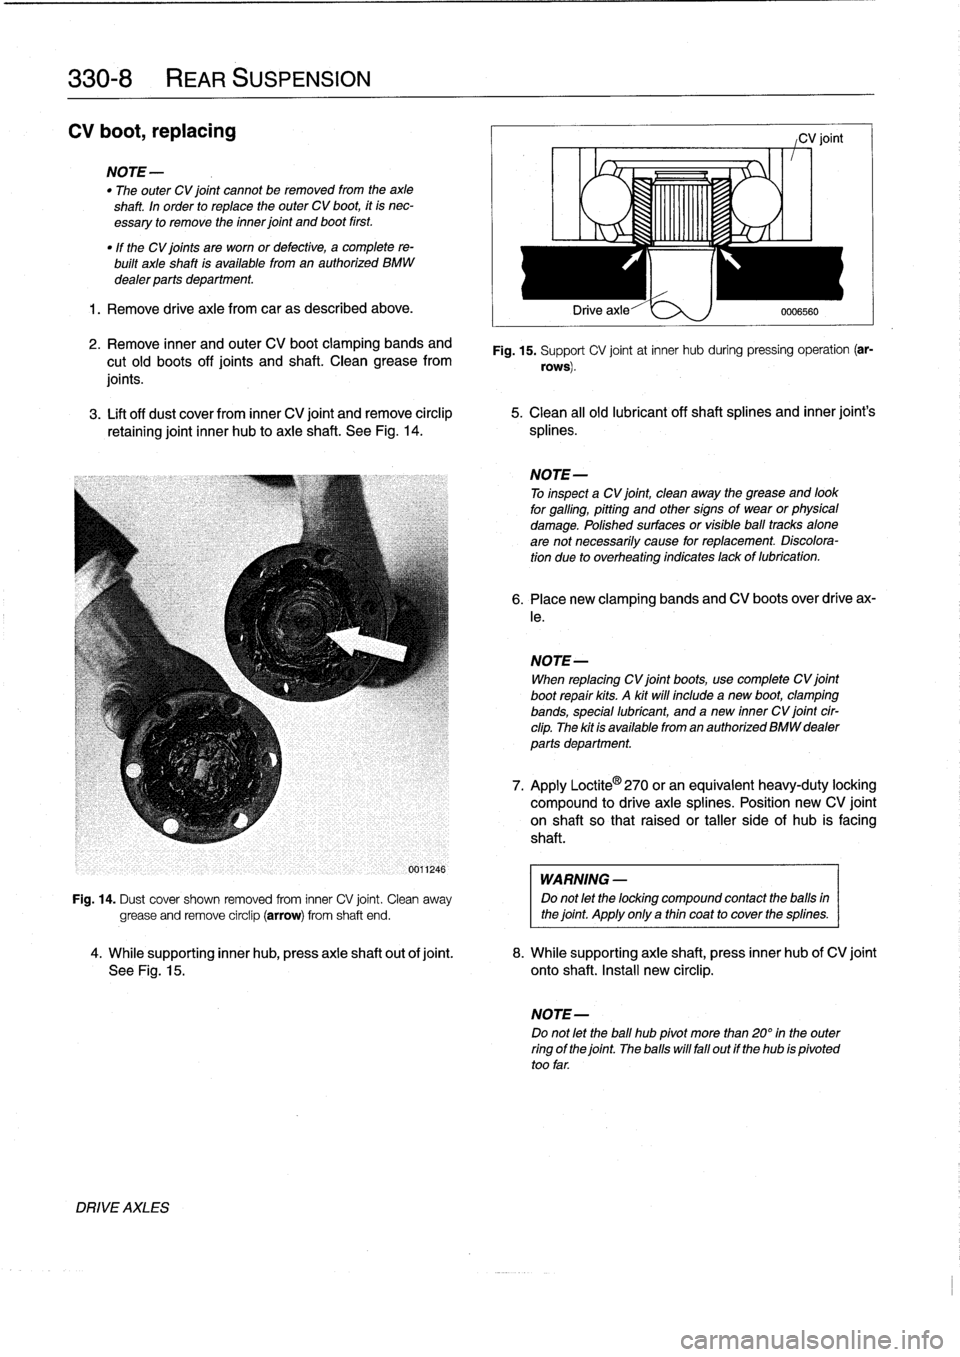 BMW M3 1998 E36 Workshop Manual 
330-
8

	

REAR
SUSPENSION

CV
boot,
replacing

NOTE-

"
The
outer
CV
joint
cannot
be
removed
from
the
axle
shaft
.
In
order
to
replace
the
outer
CV
boot,
it
is
nec-
essary
to
remove
the
inner
joint
